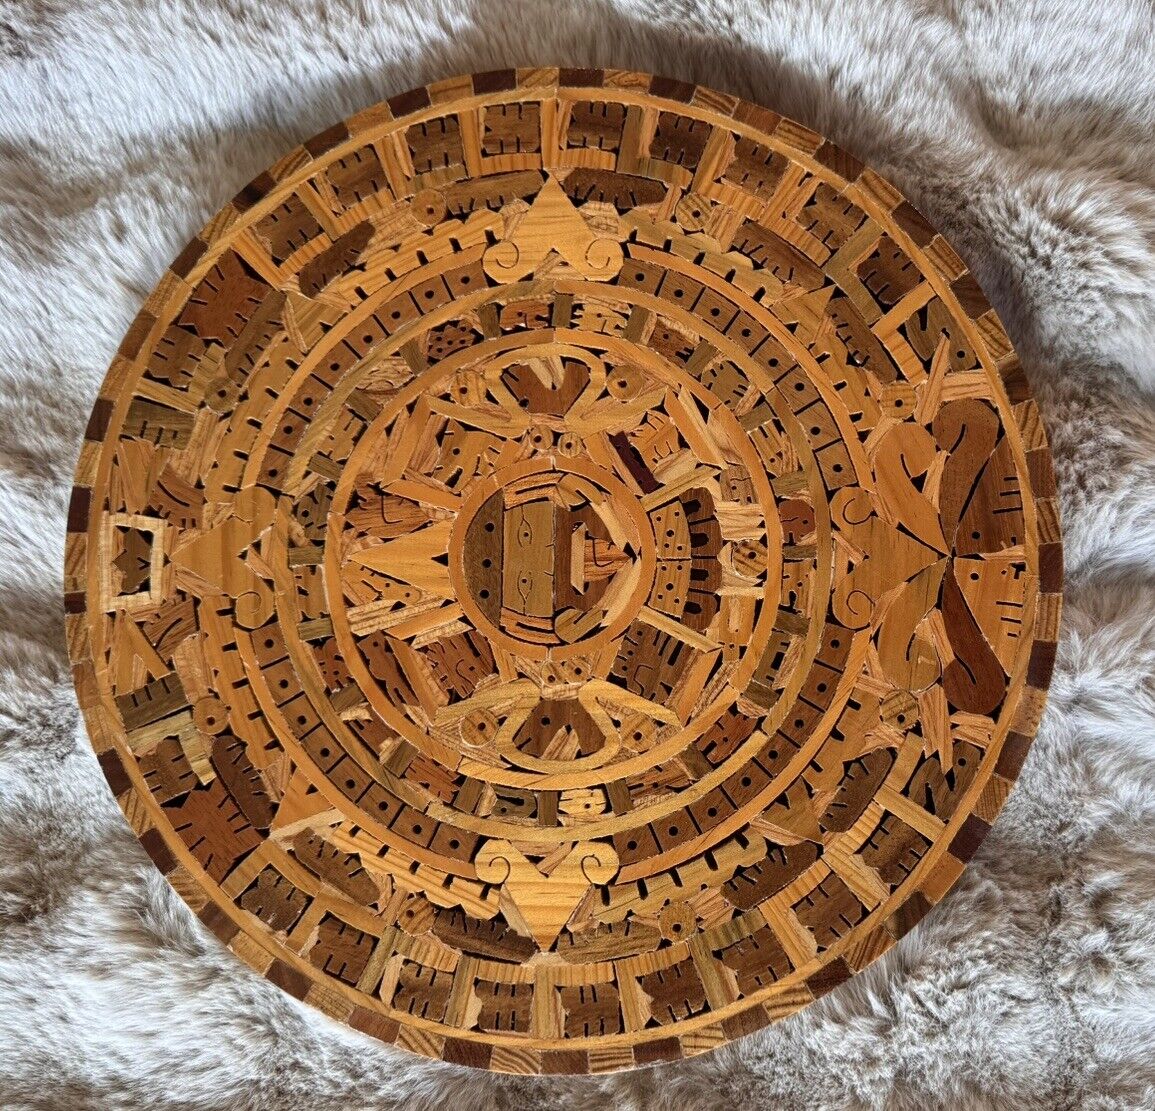 Vintage Wooden Aztec Mayan Mexico Calendar Hand Carved Inlay Wood Art Mexican 